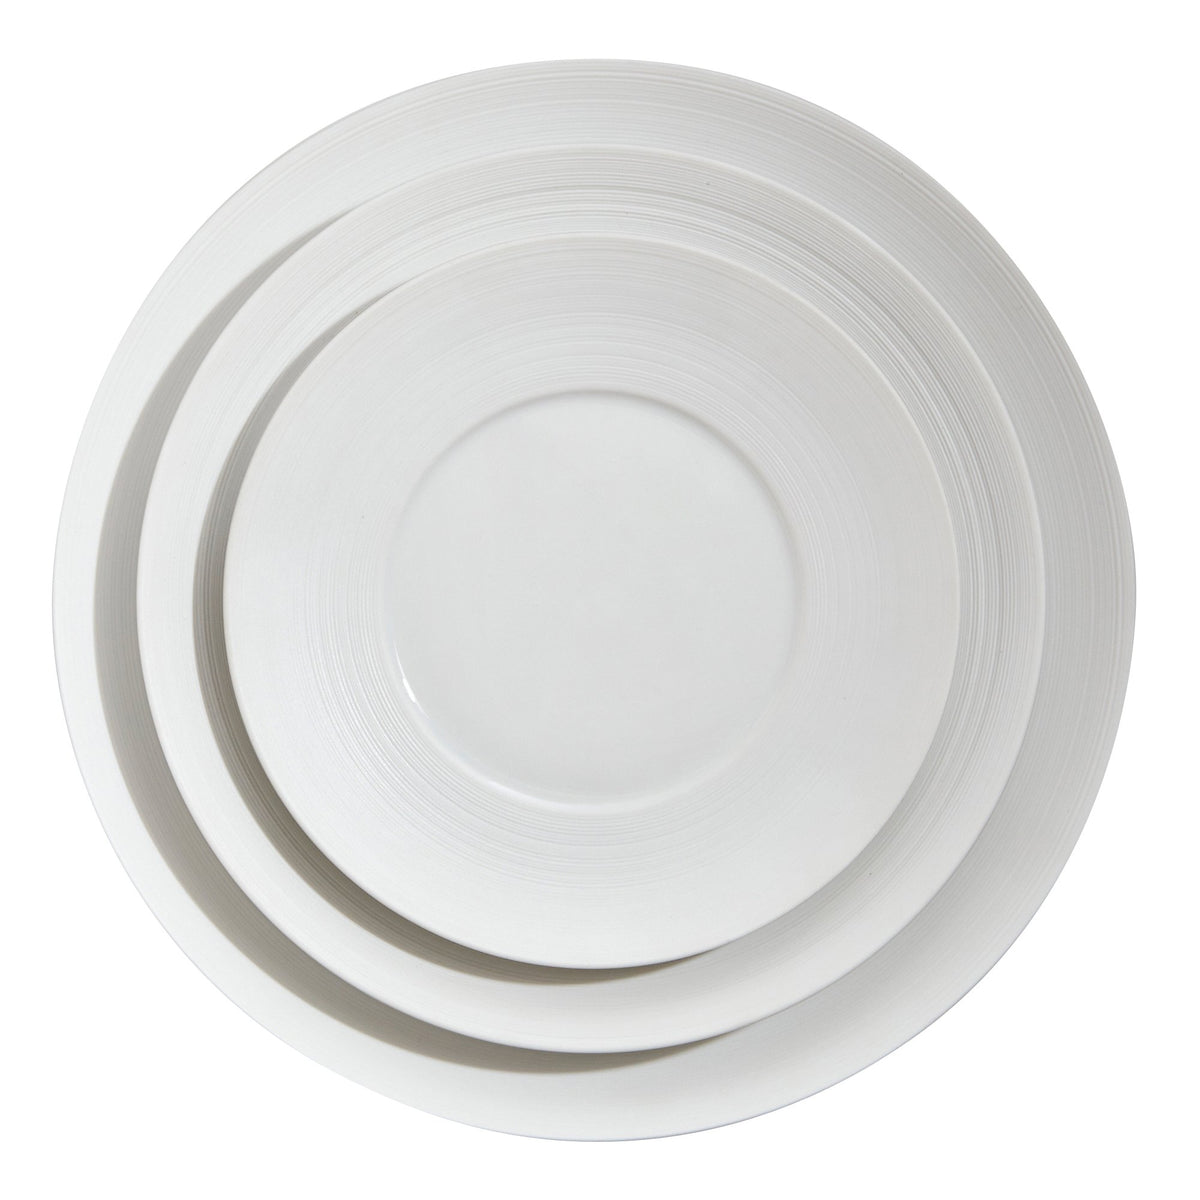 Hemisphere Charger Plate - White